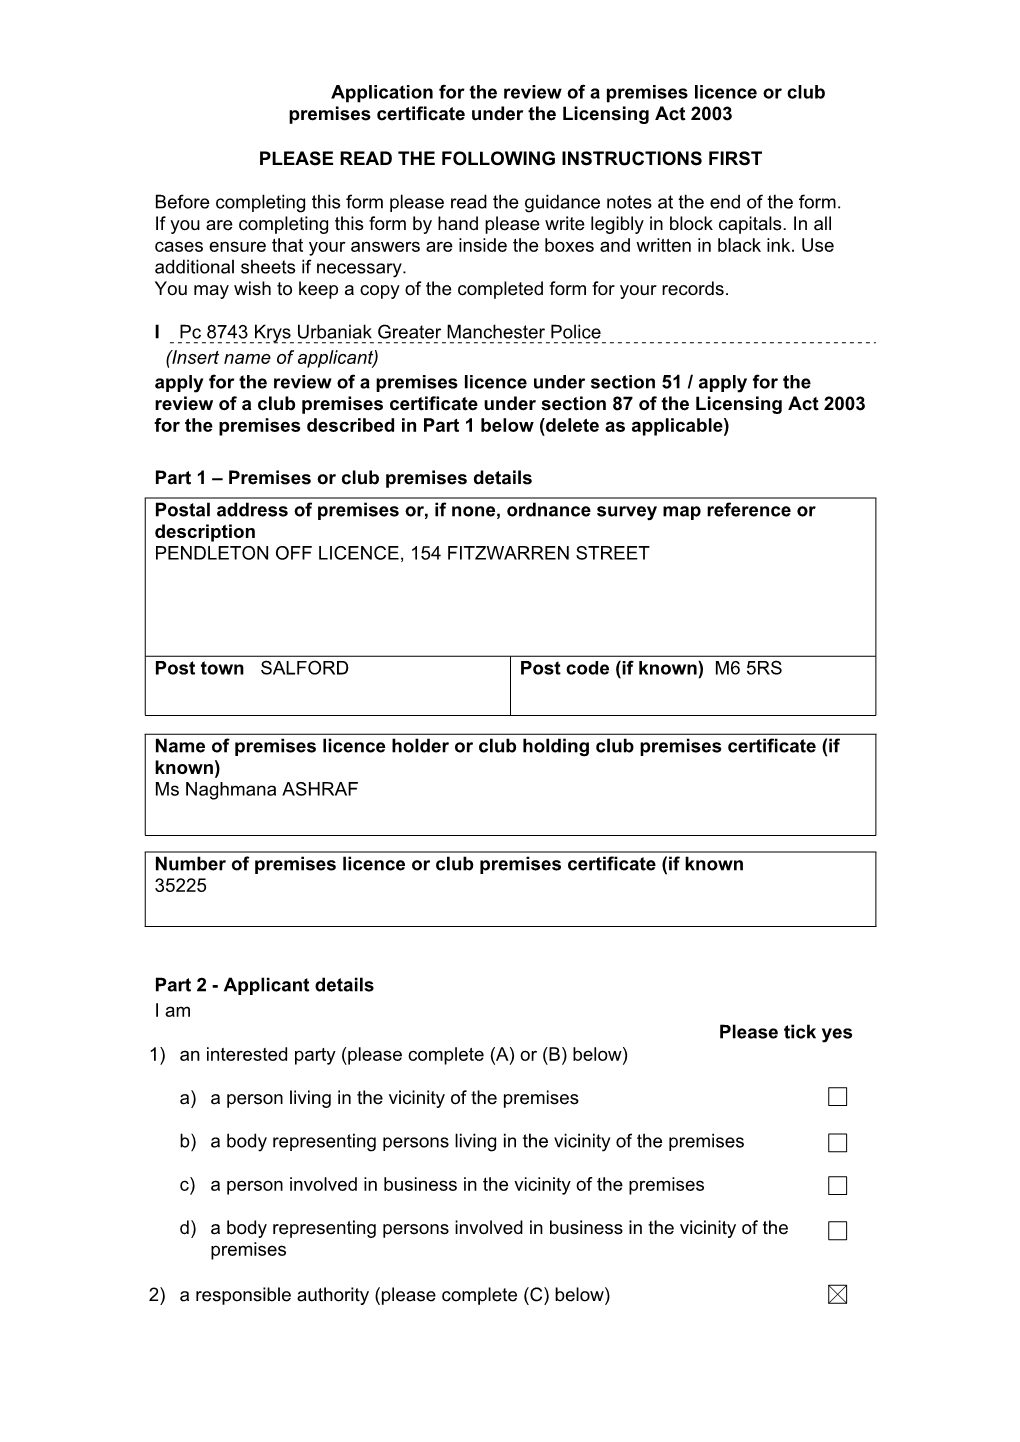 Application for the Review of a Premises Licence Or Club Premises Certificate Under the Licensing Act 2003